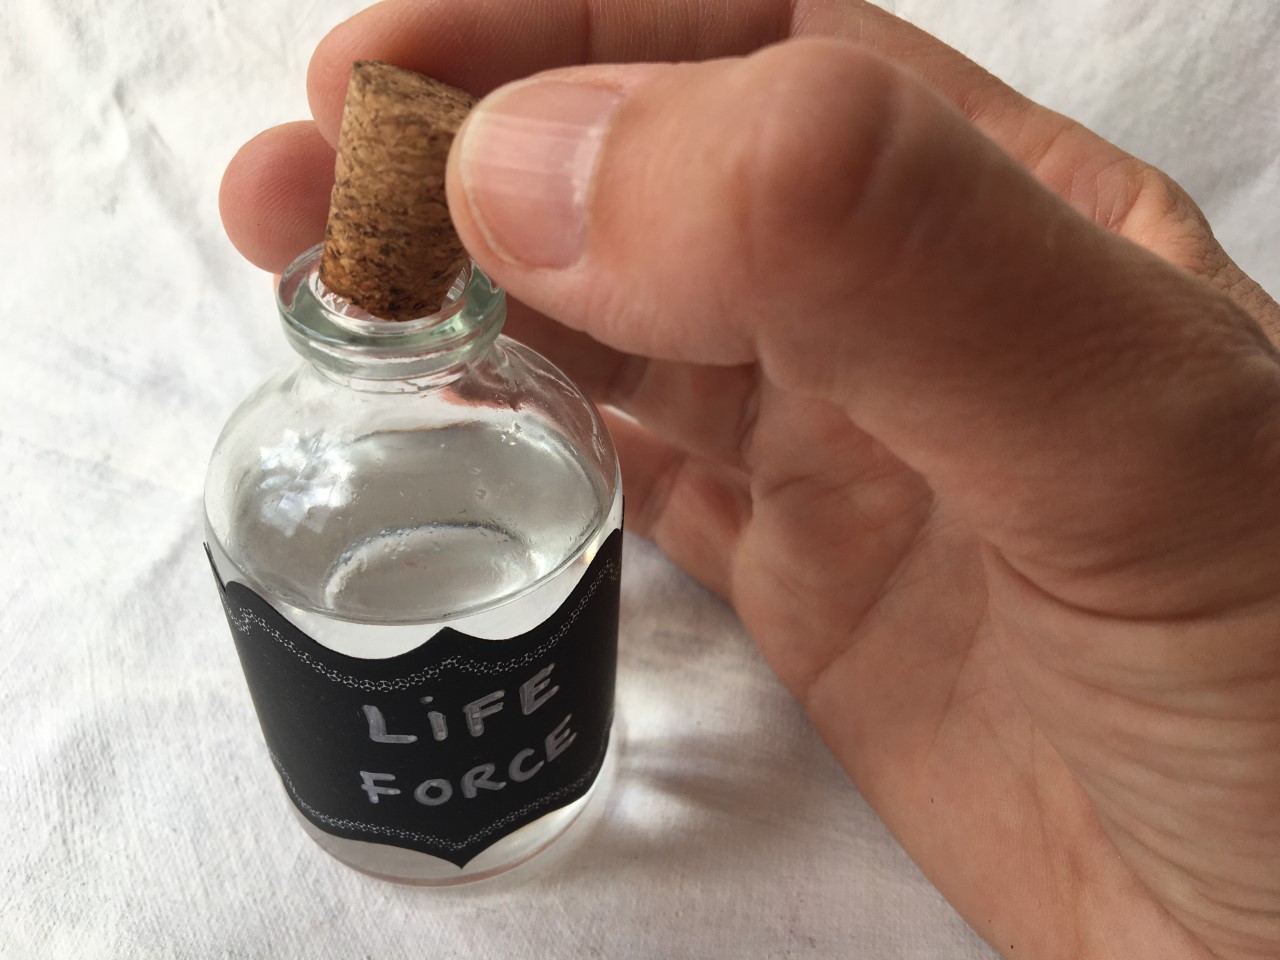 hand taking cork out of bottle